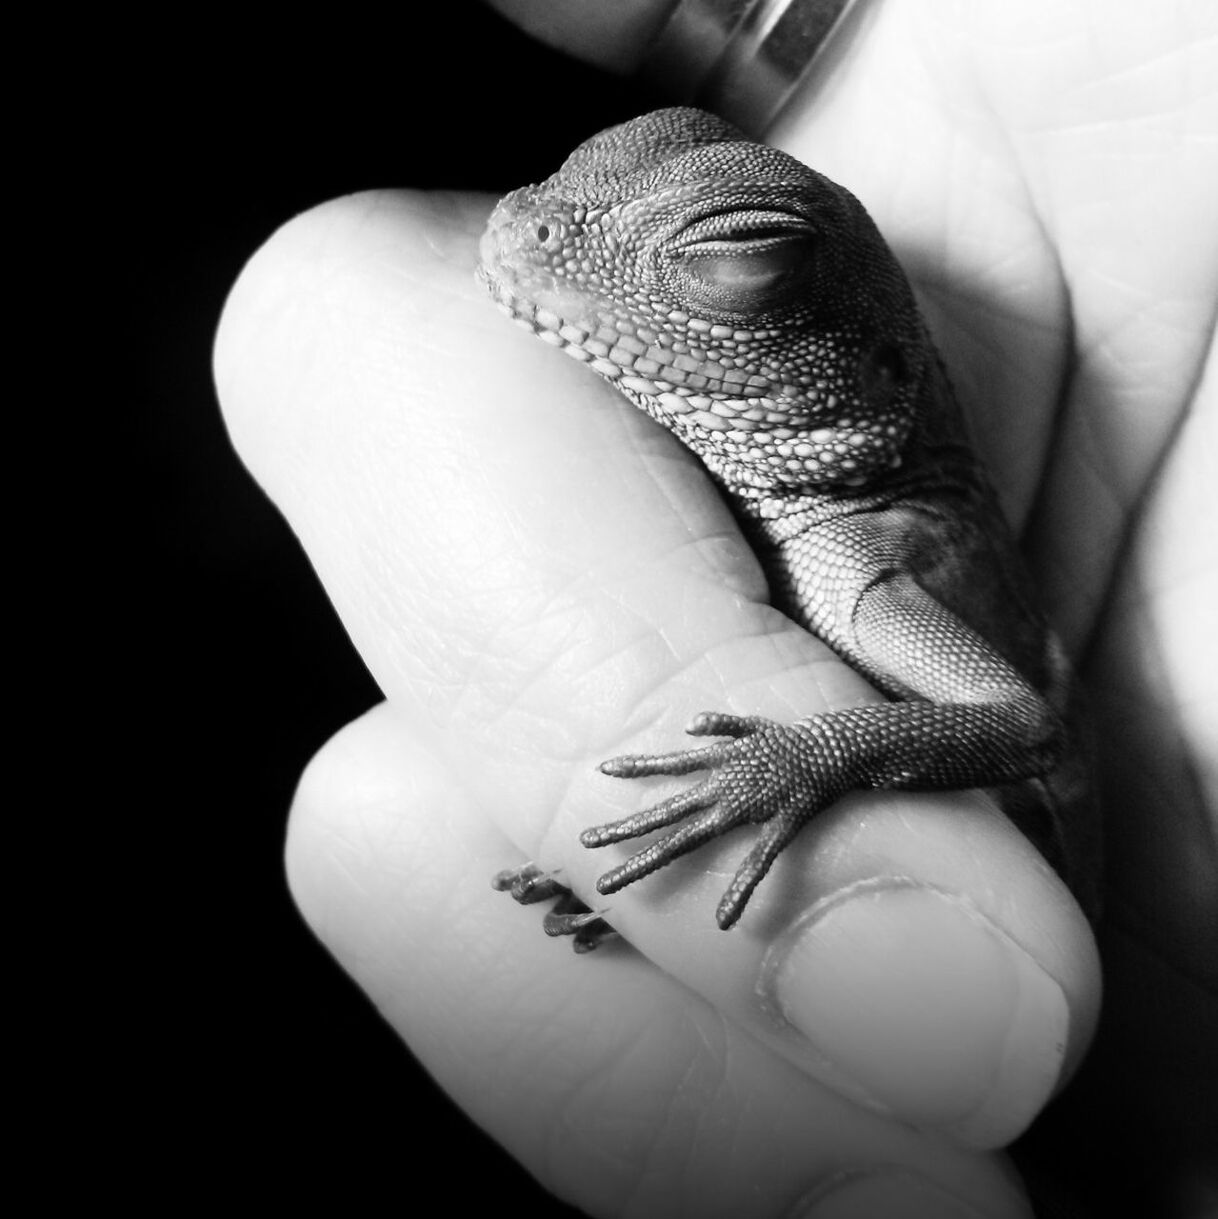 Woman holding lizard in hand